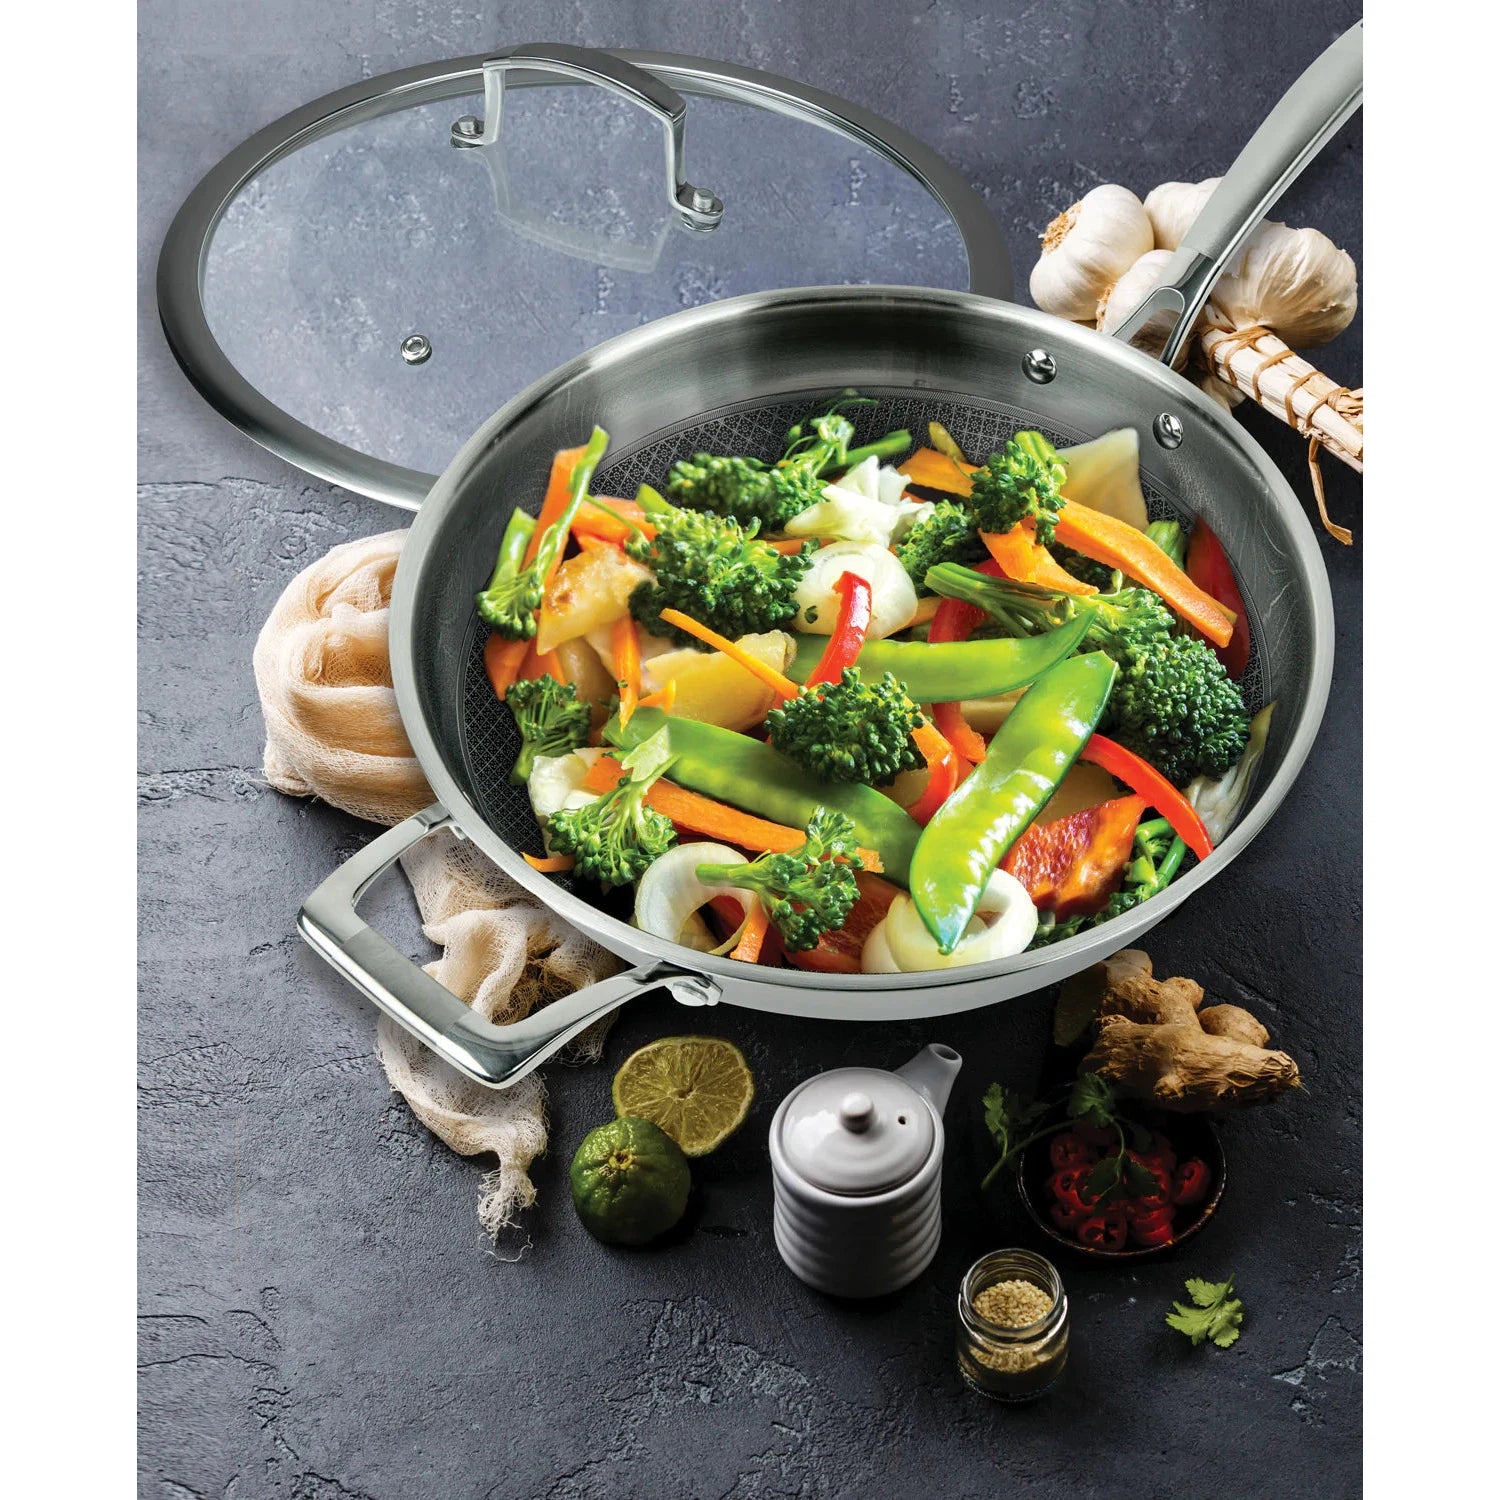 Stainless Steel / Glass Wok Cover